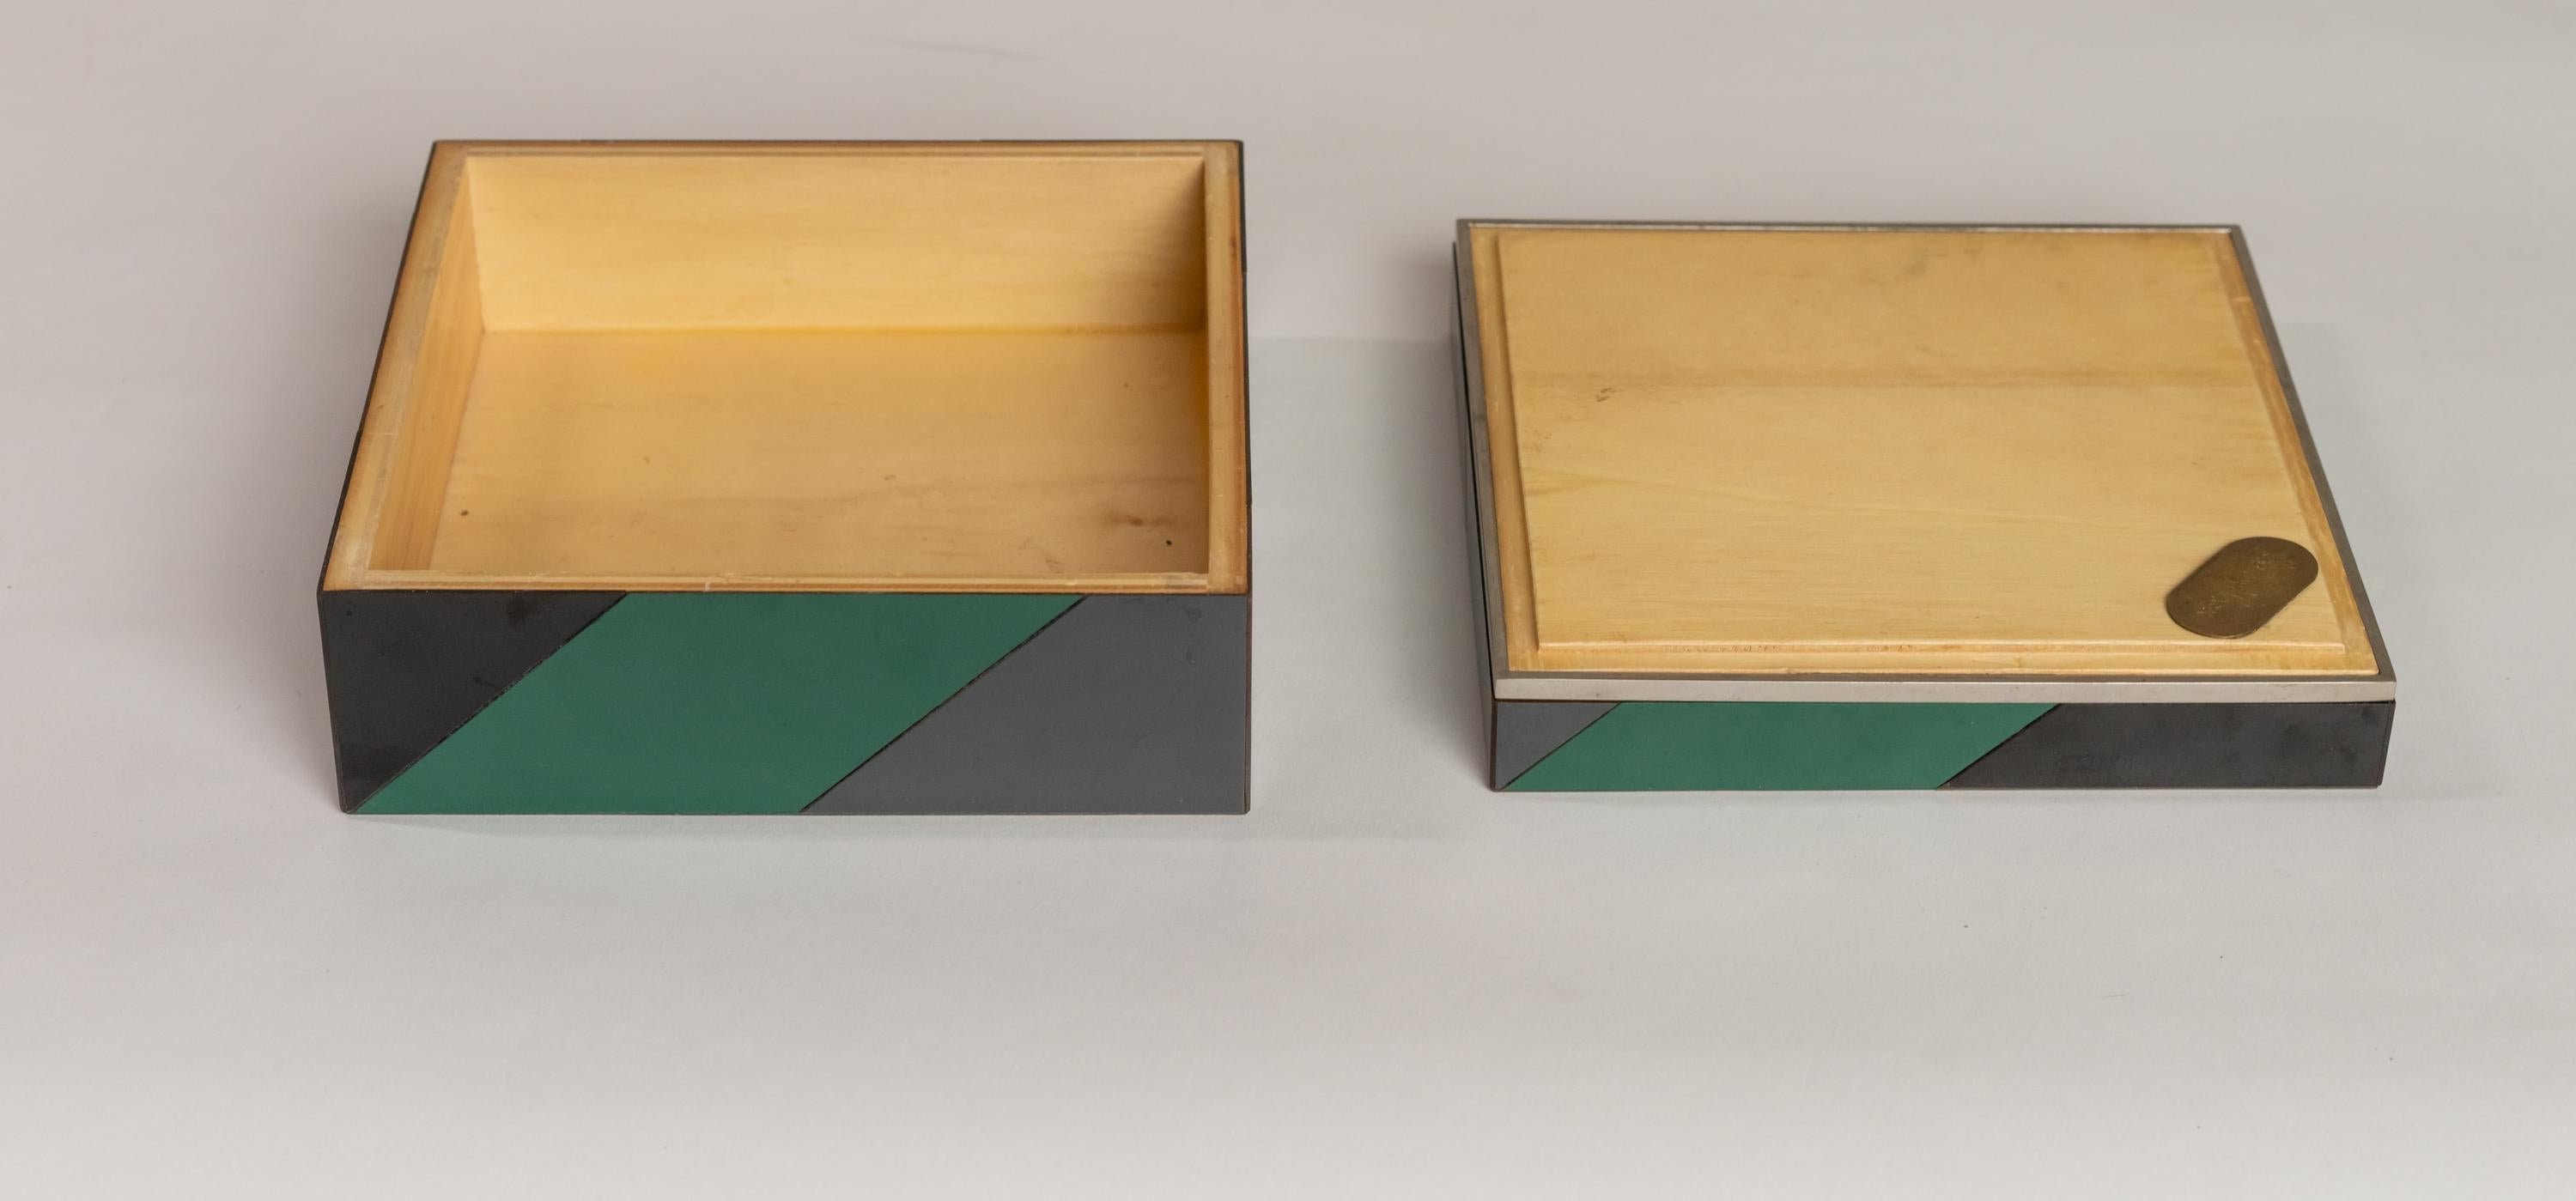 Set of 3 Polychrome and Laminated and Polished Nickel Art Deco Style Boxes For Sale 10